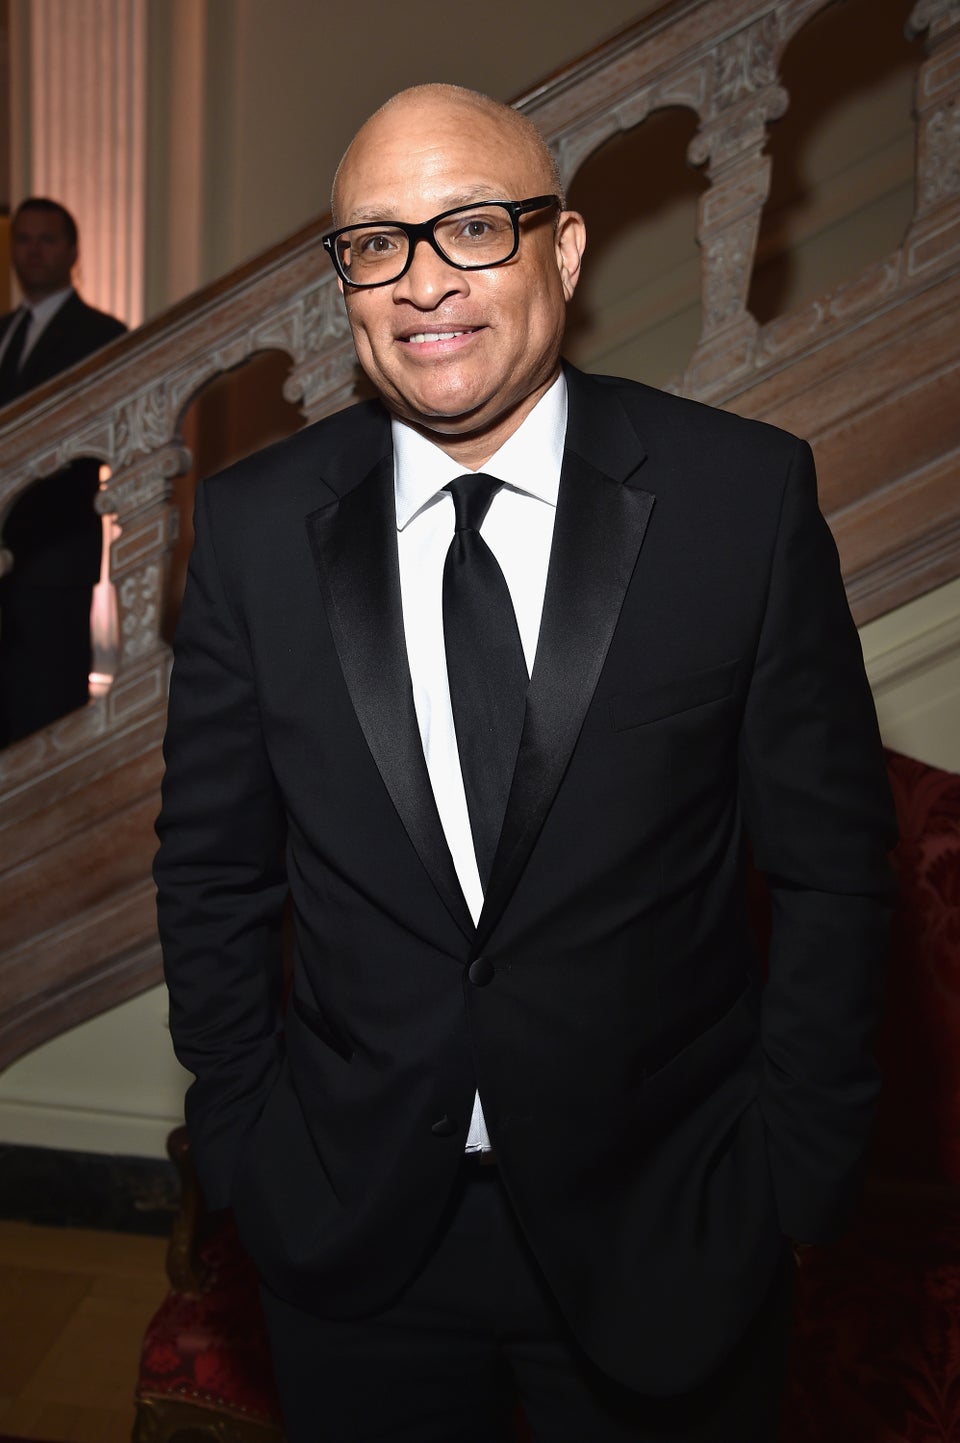 Larry Wilmore Reflects on Show Cancellation: ‘I Don’t Think Color Has Anything To Do With It’